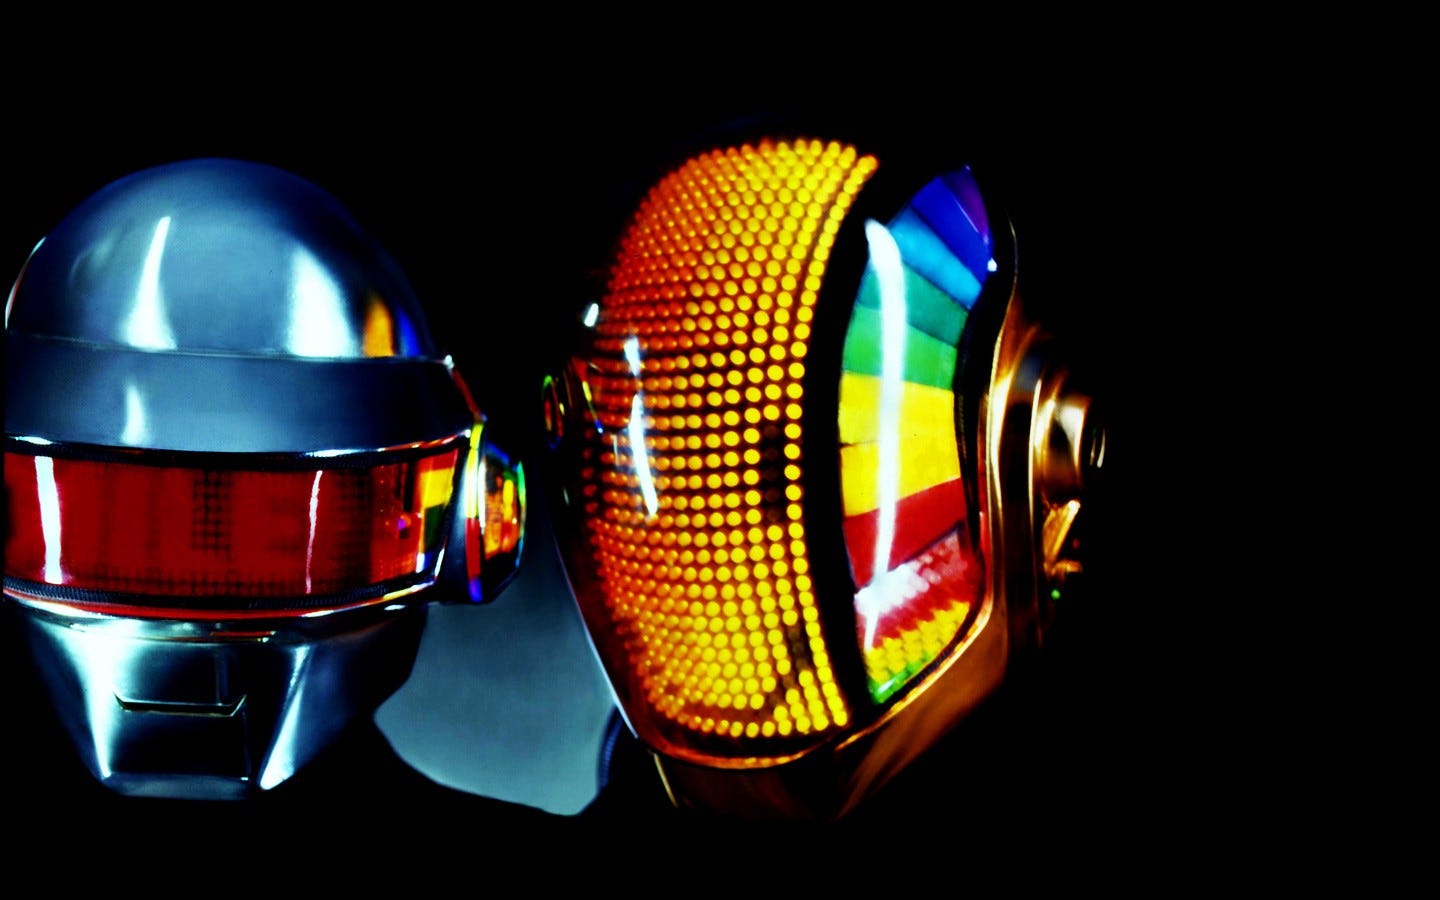 A History of Roulé, Daft Punk's Forgotten Record Label, by Ben Cardew, Cuepoint